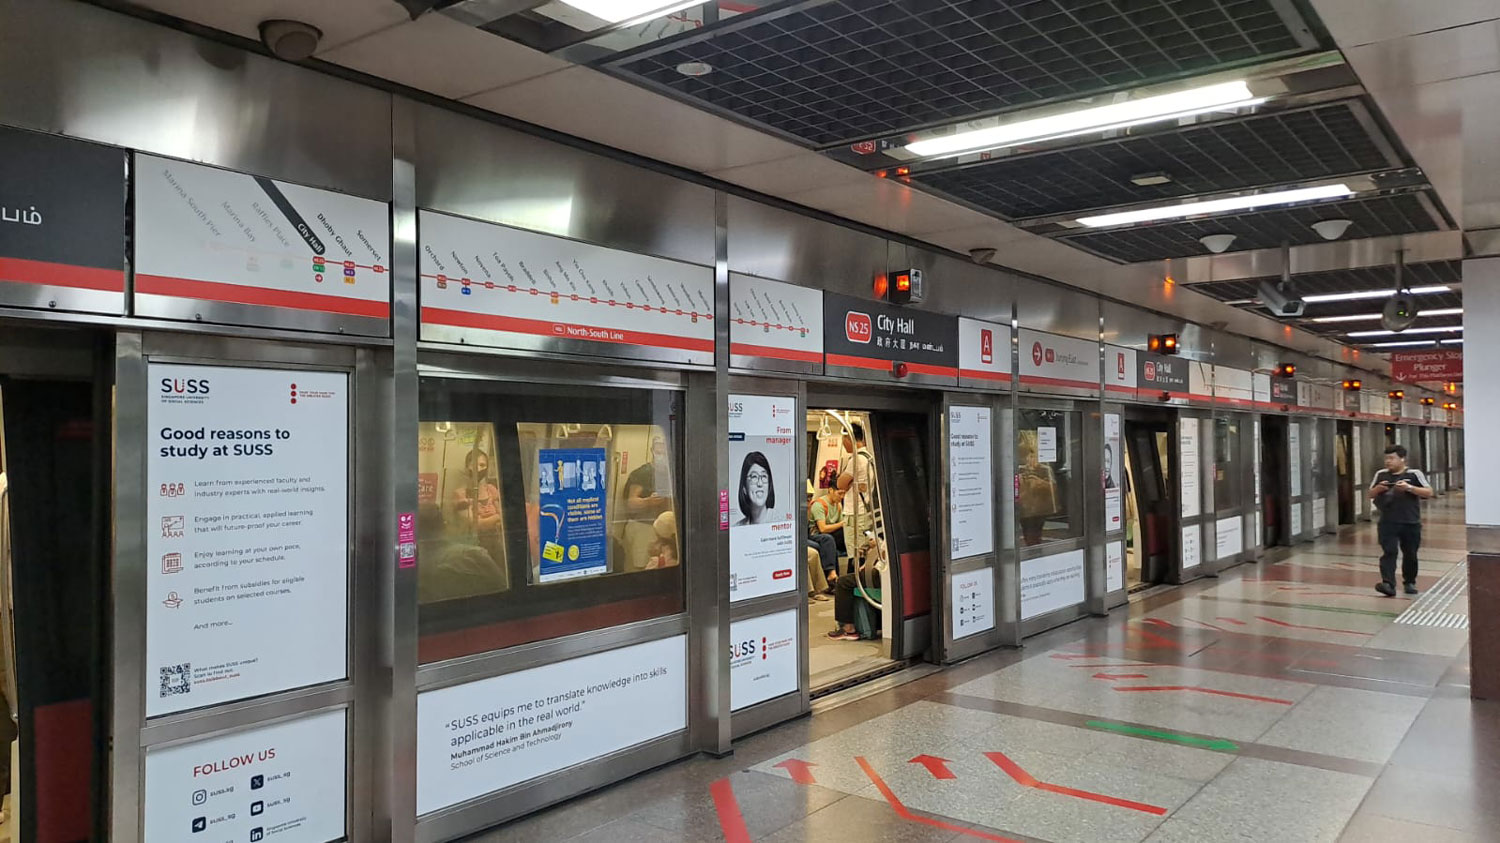 Hong Kong MTR has played a significant role in the infrastructure evolution of this smart city.